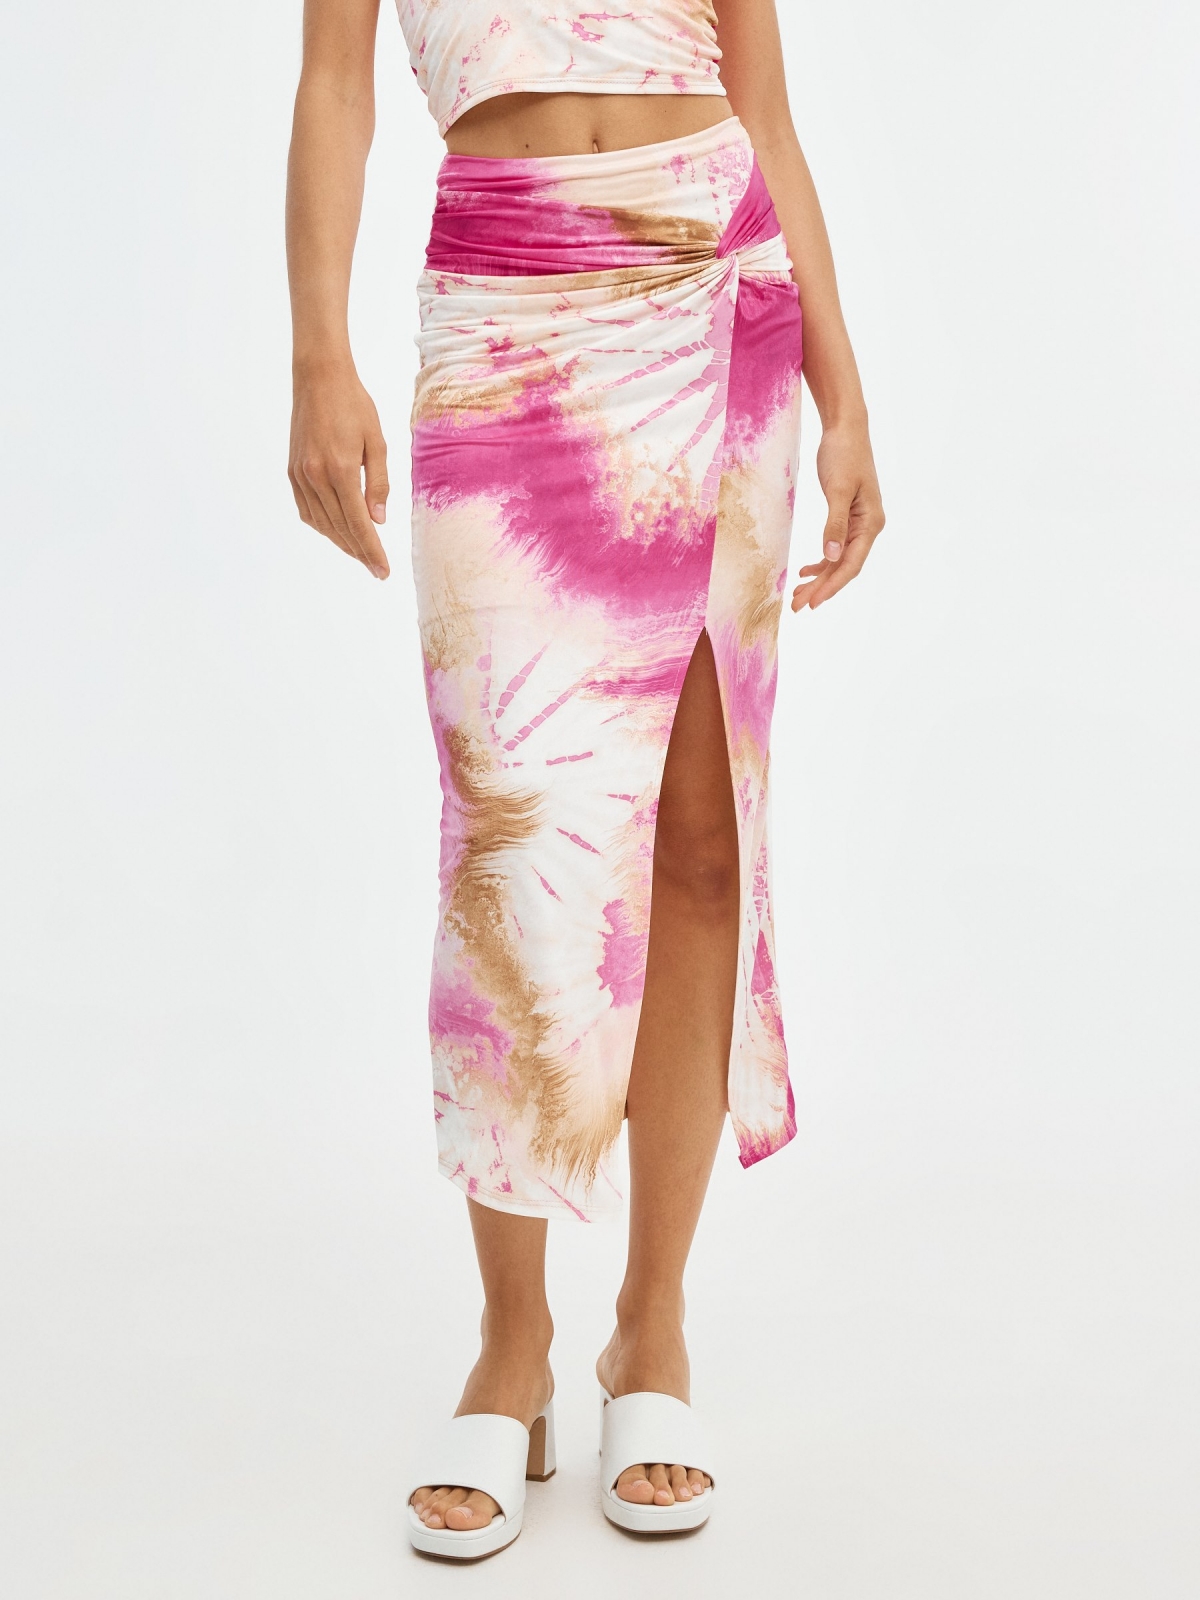 Knotted tie&dye midi skirt fuchsia middle back view